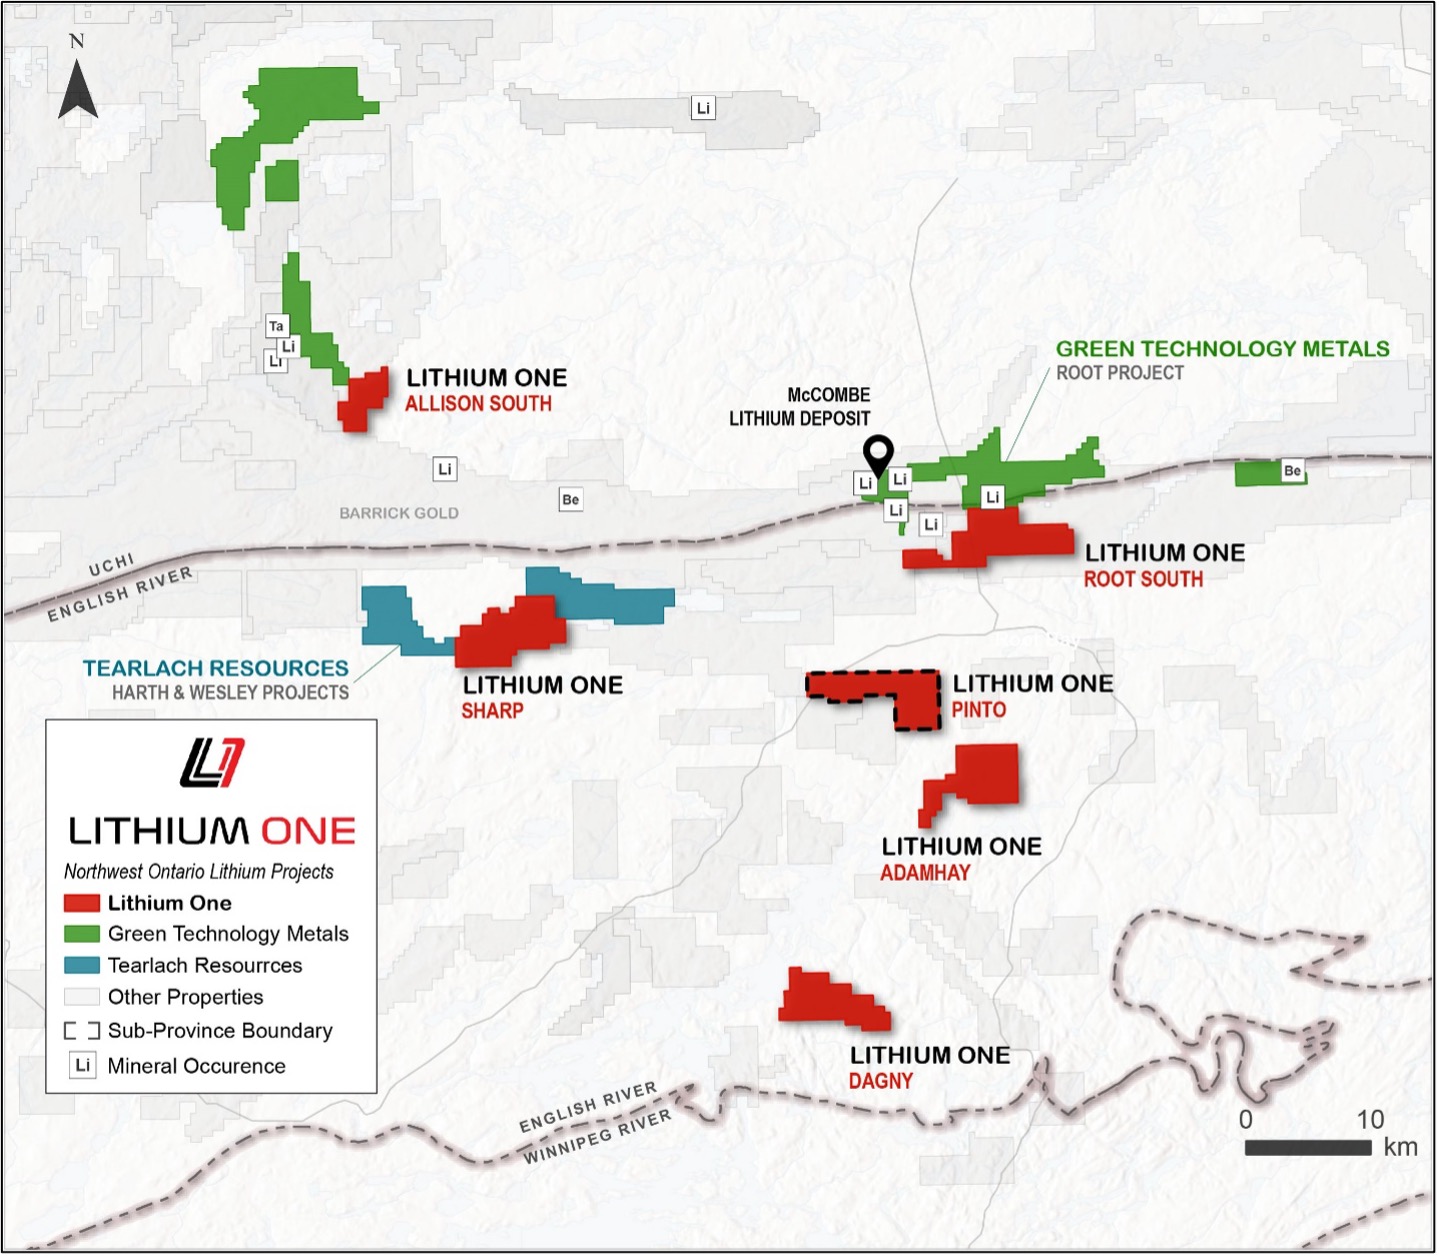 Figure 1. Overview map showing the location the new Pinto Lithium Property and LONE’s other lithium properties in the Red Lake Mining Division in northwestern Ontario.